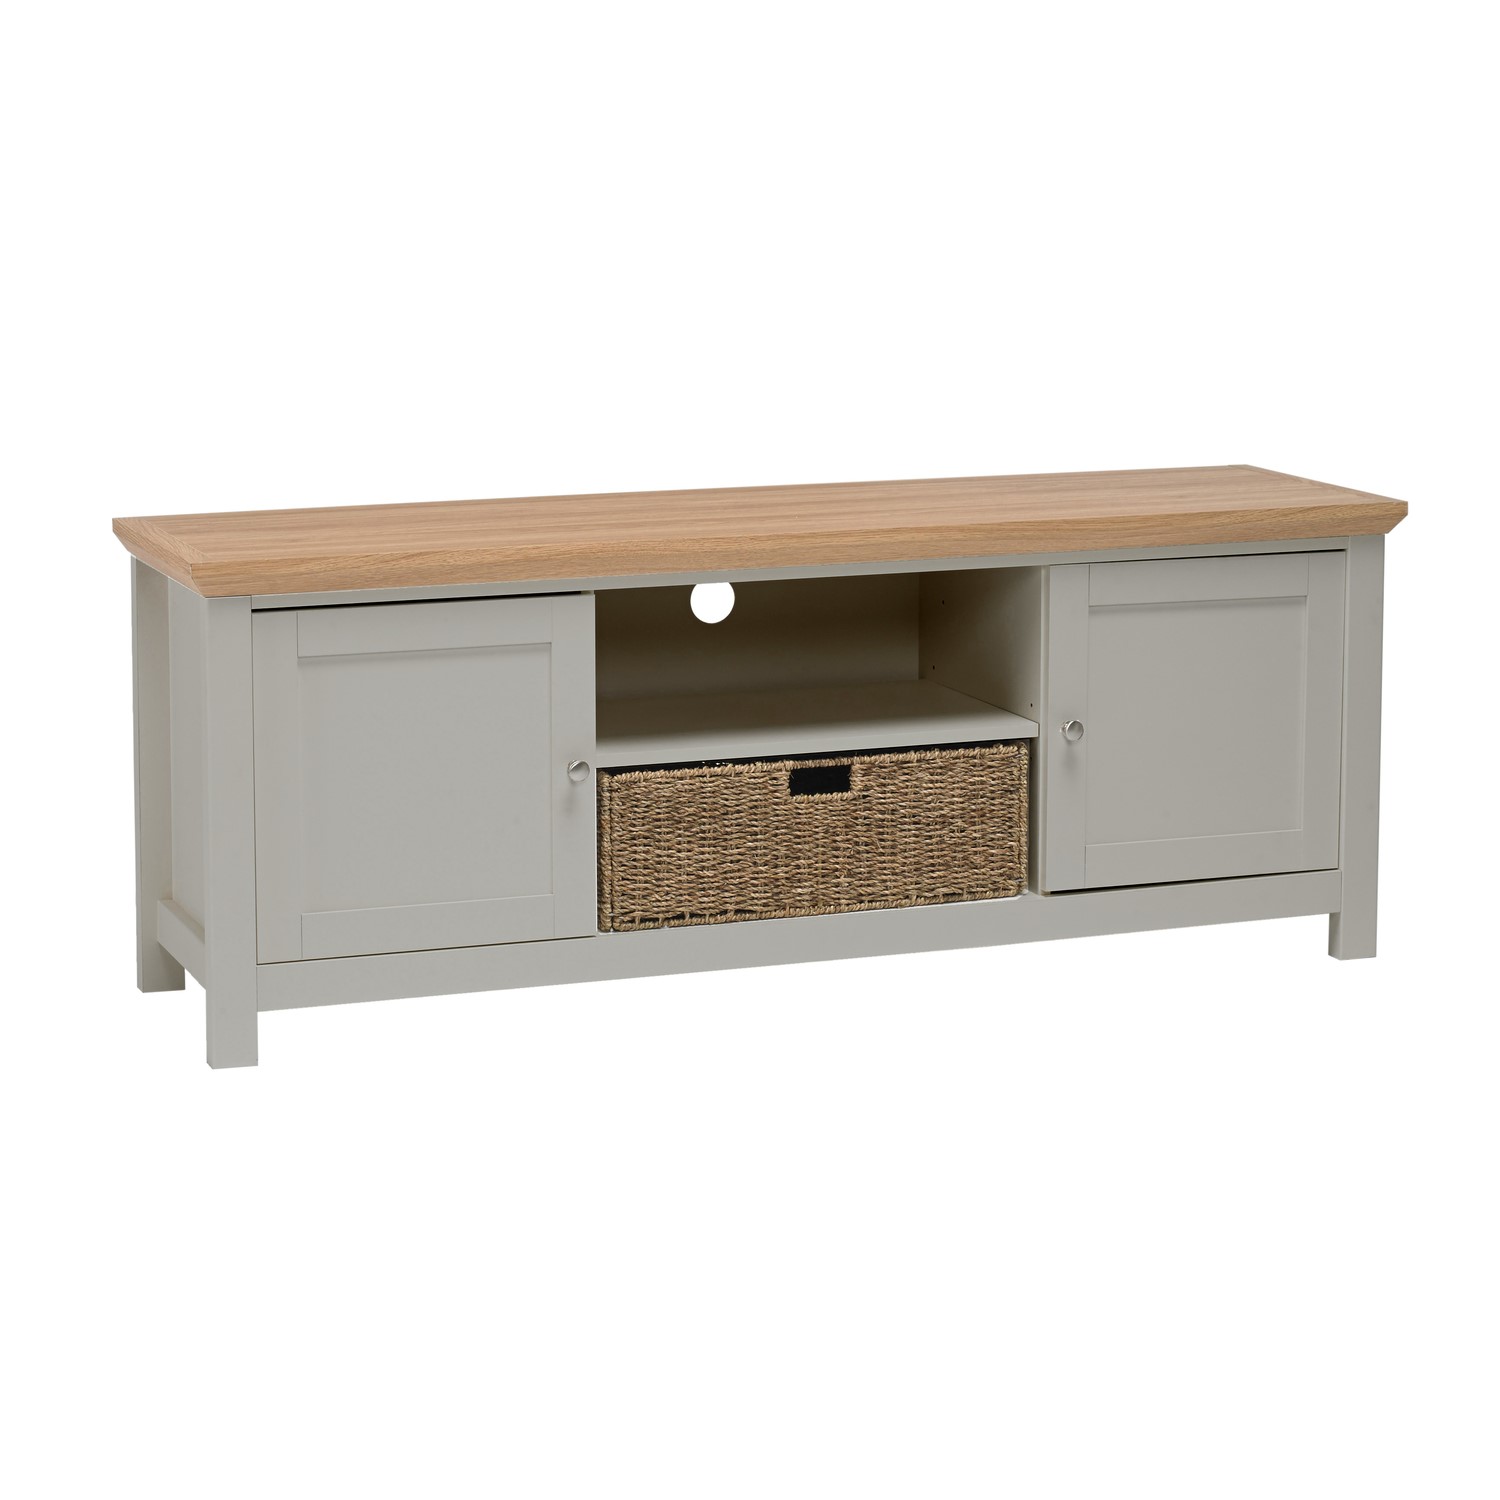 Photo of Large tv stand with storage in grey - tvs up to 50 - cotswold